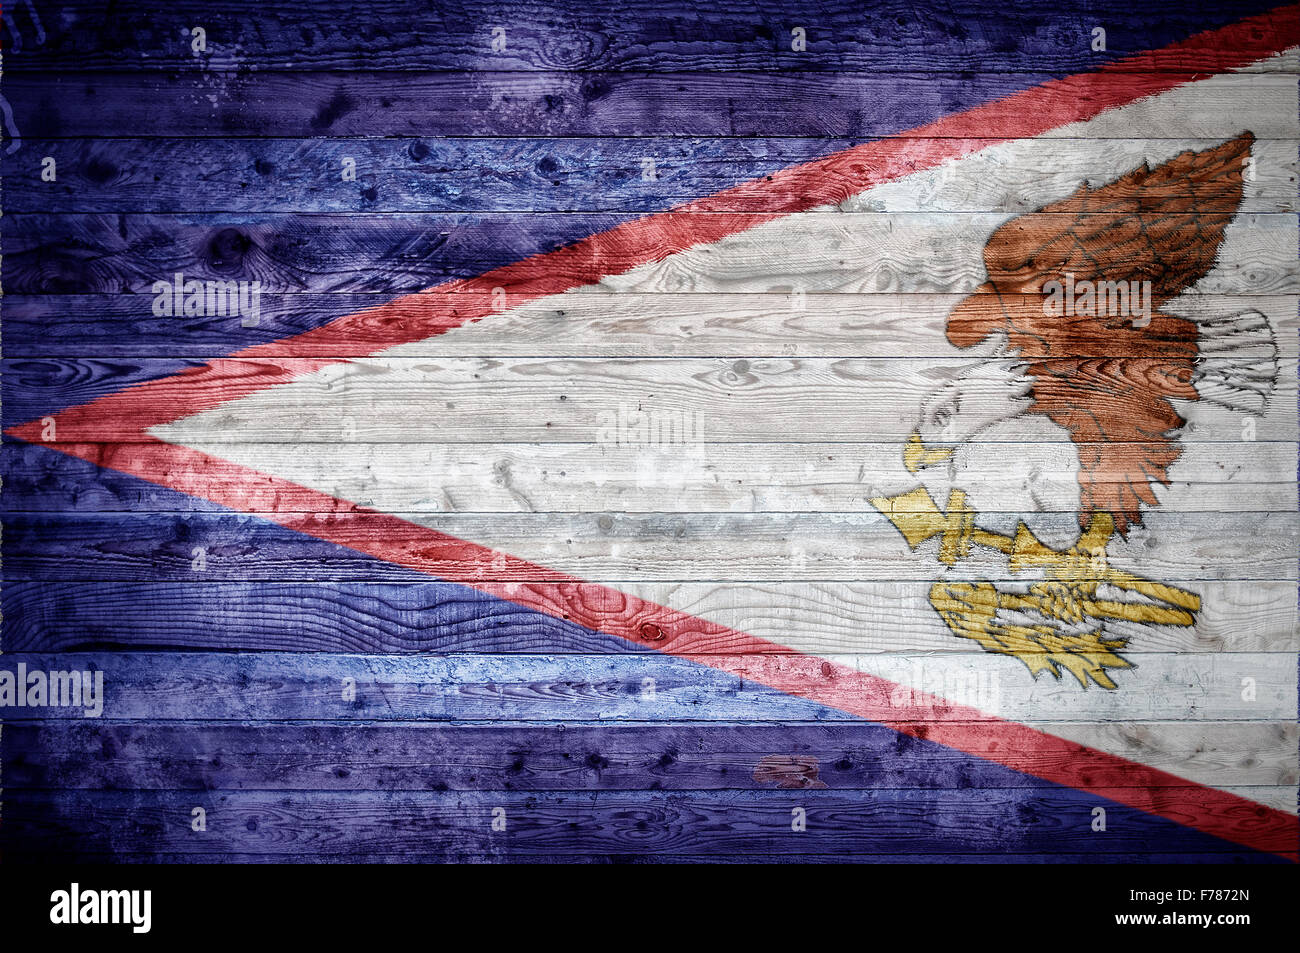 A vignetted background image of the flag of American Samoa painted onto wooden boards of a wall or floor. Stock Photo